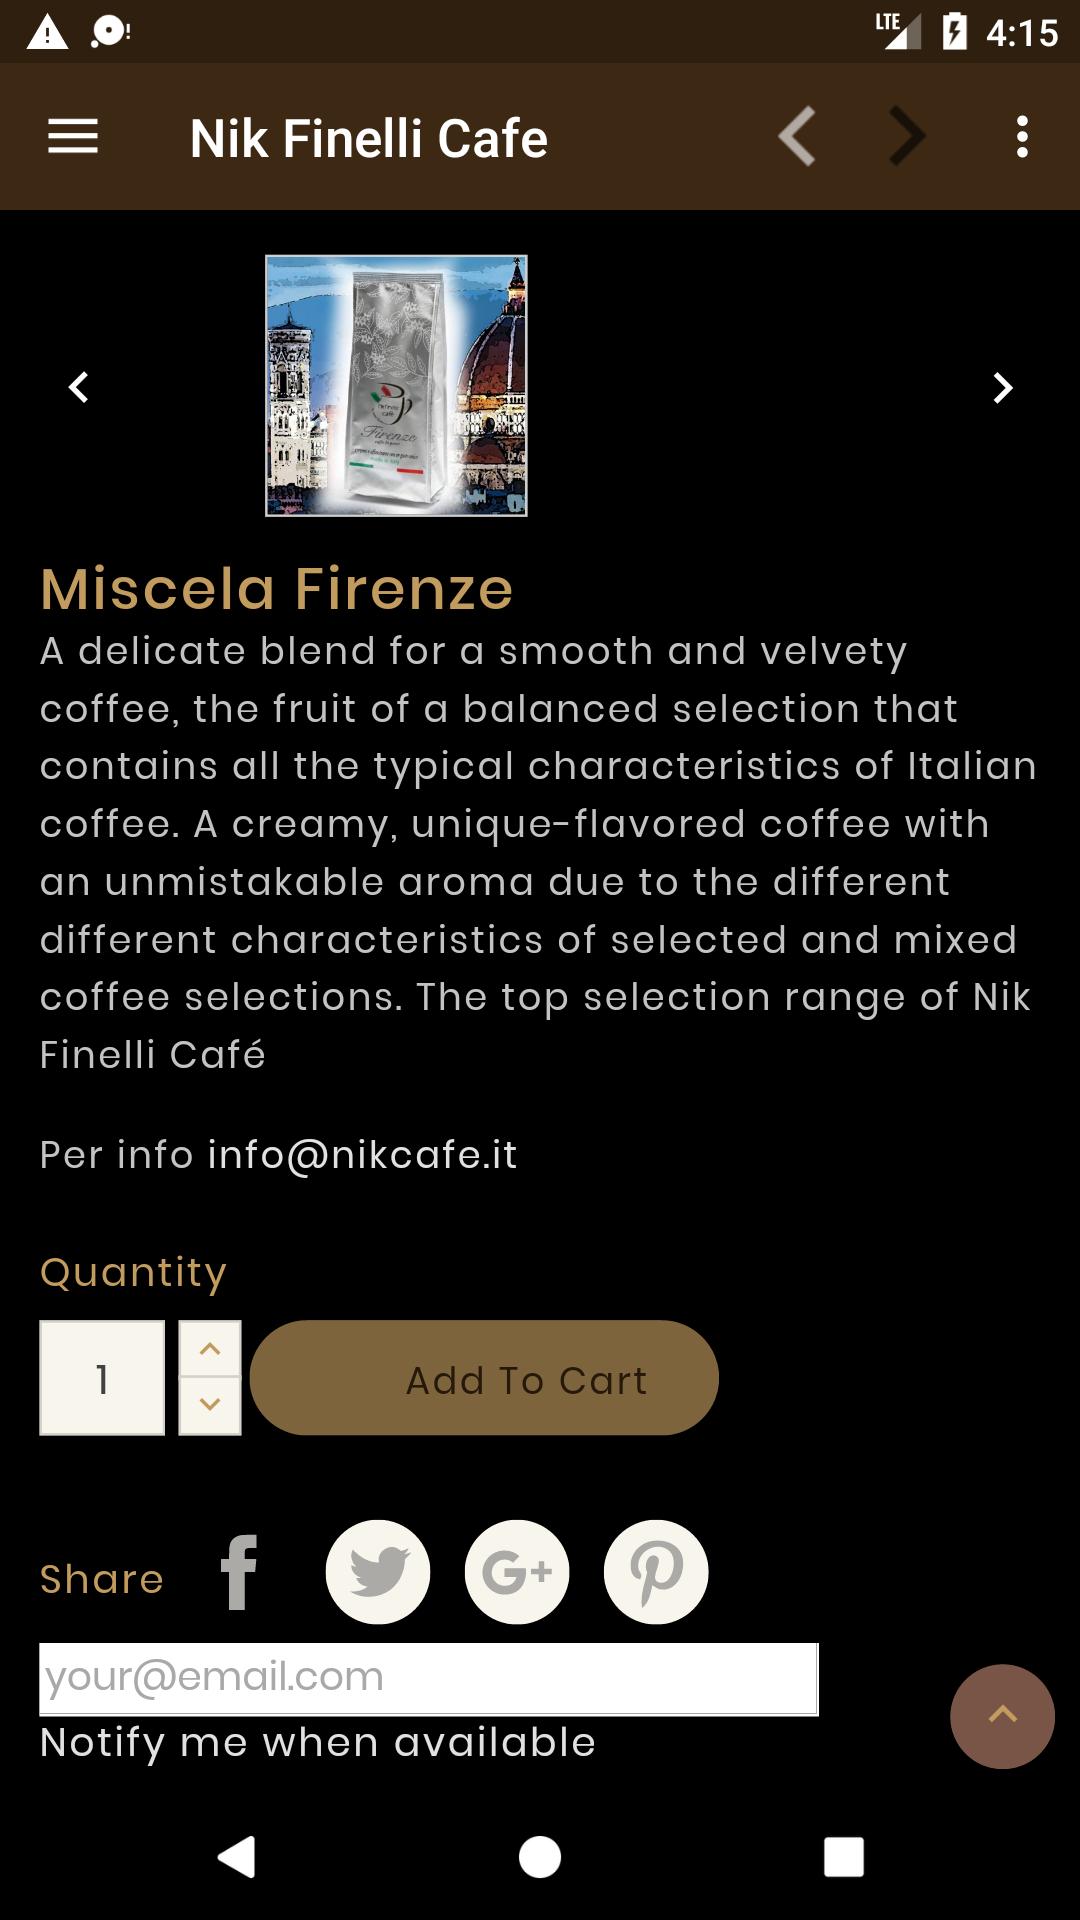 Nik Finelli Cafe for Android - APK Download